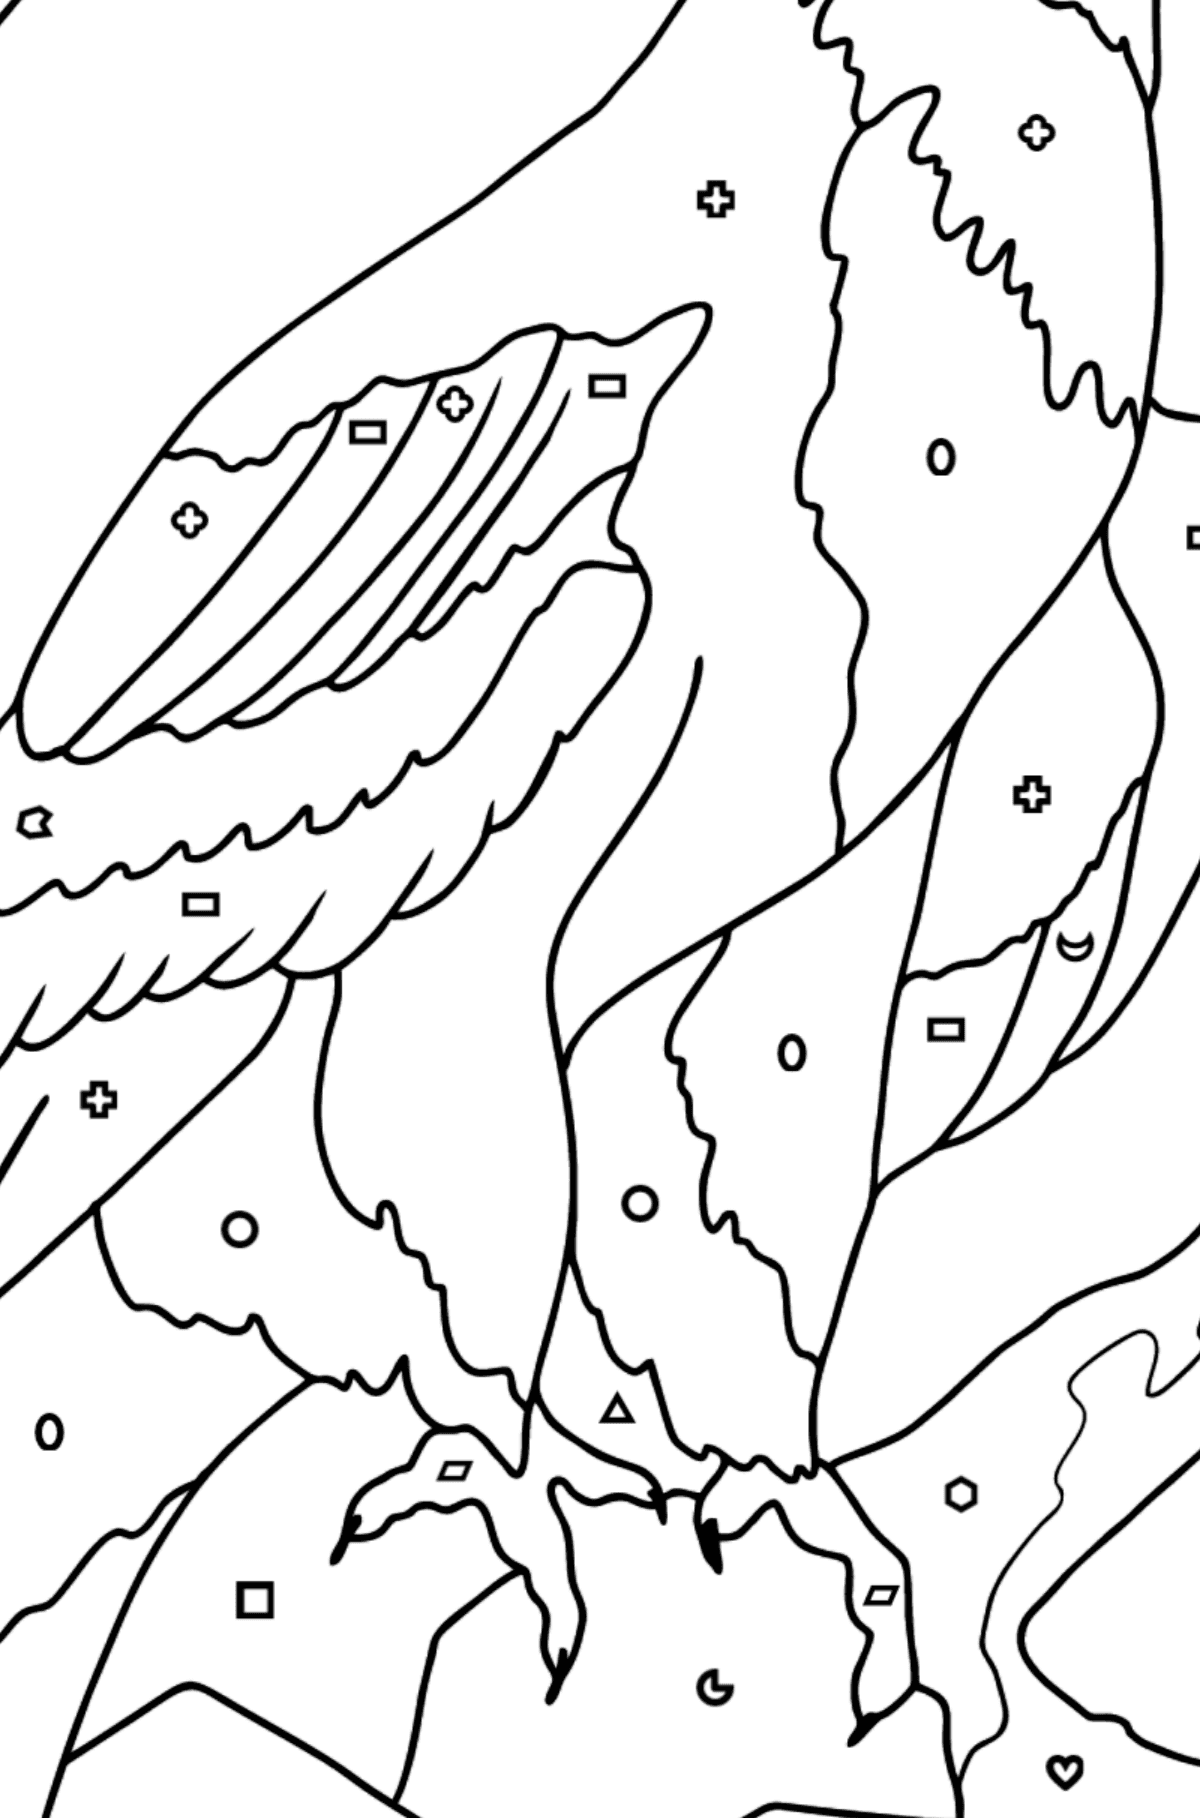 Coloring Page - An Eagle is Looking for Prey - Coloring by Geometric Shapes for Kids